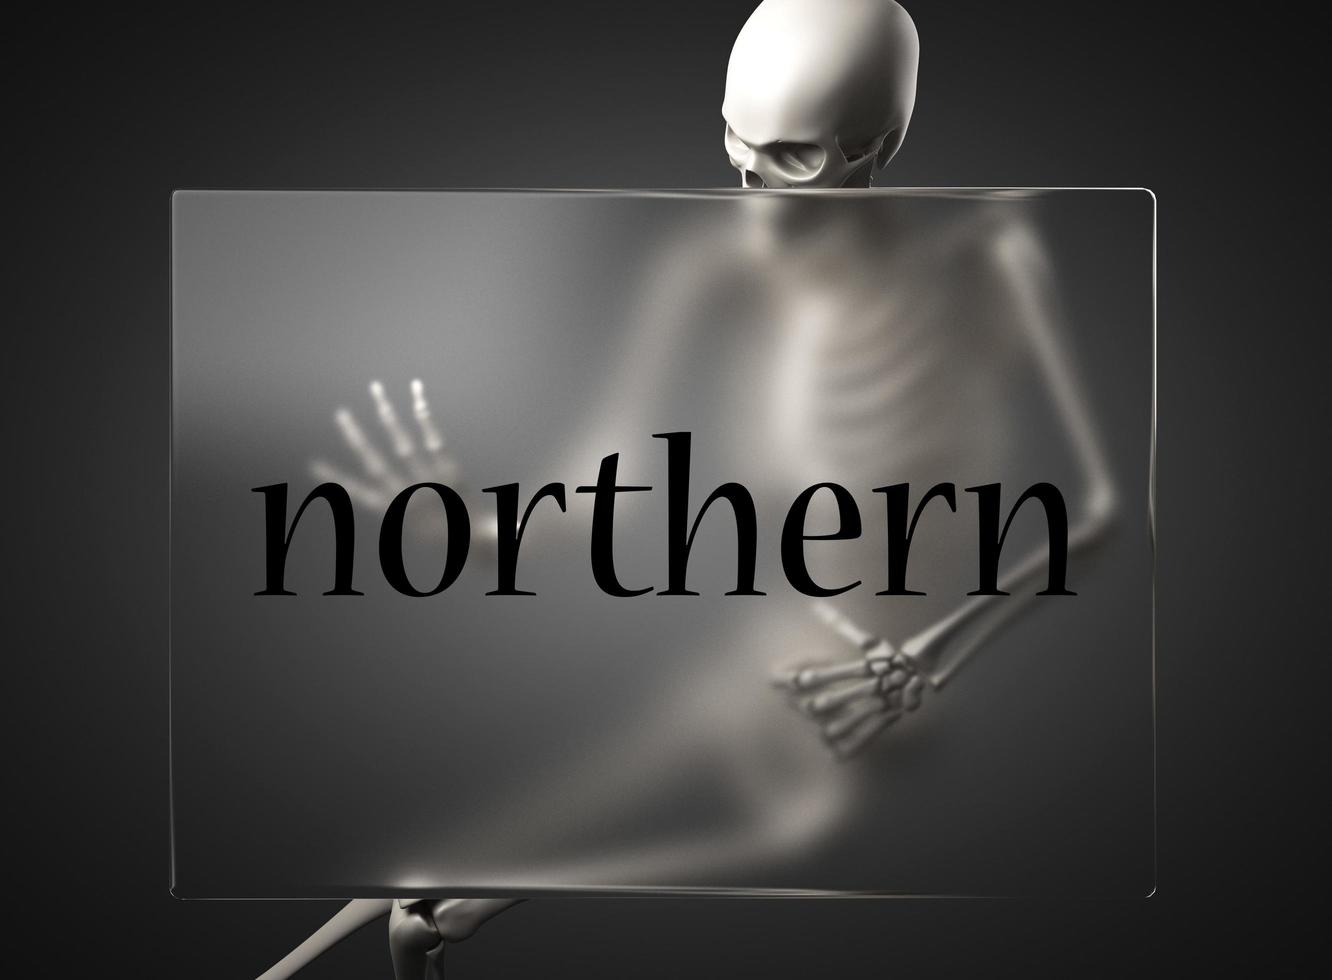 northern word on glass and skeleton photo